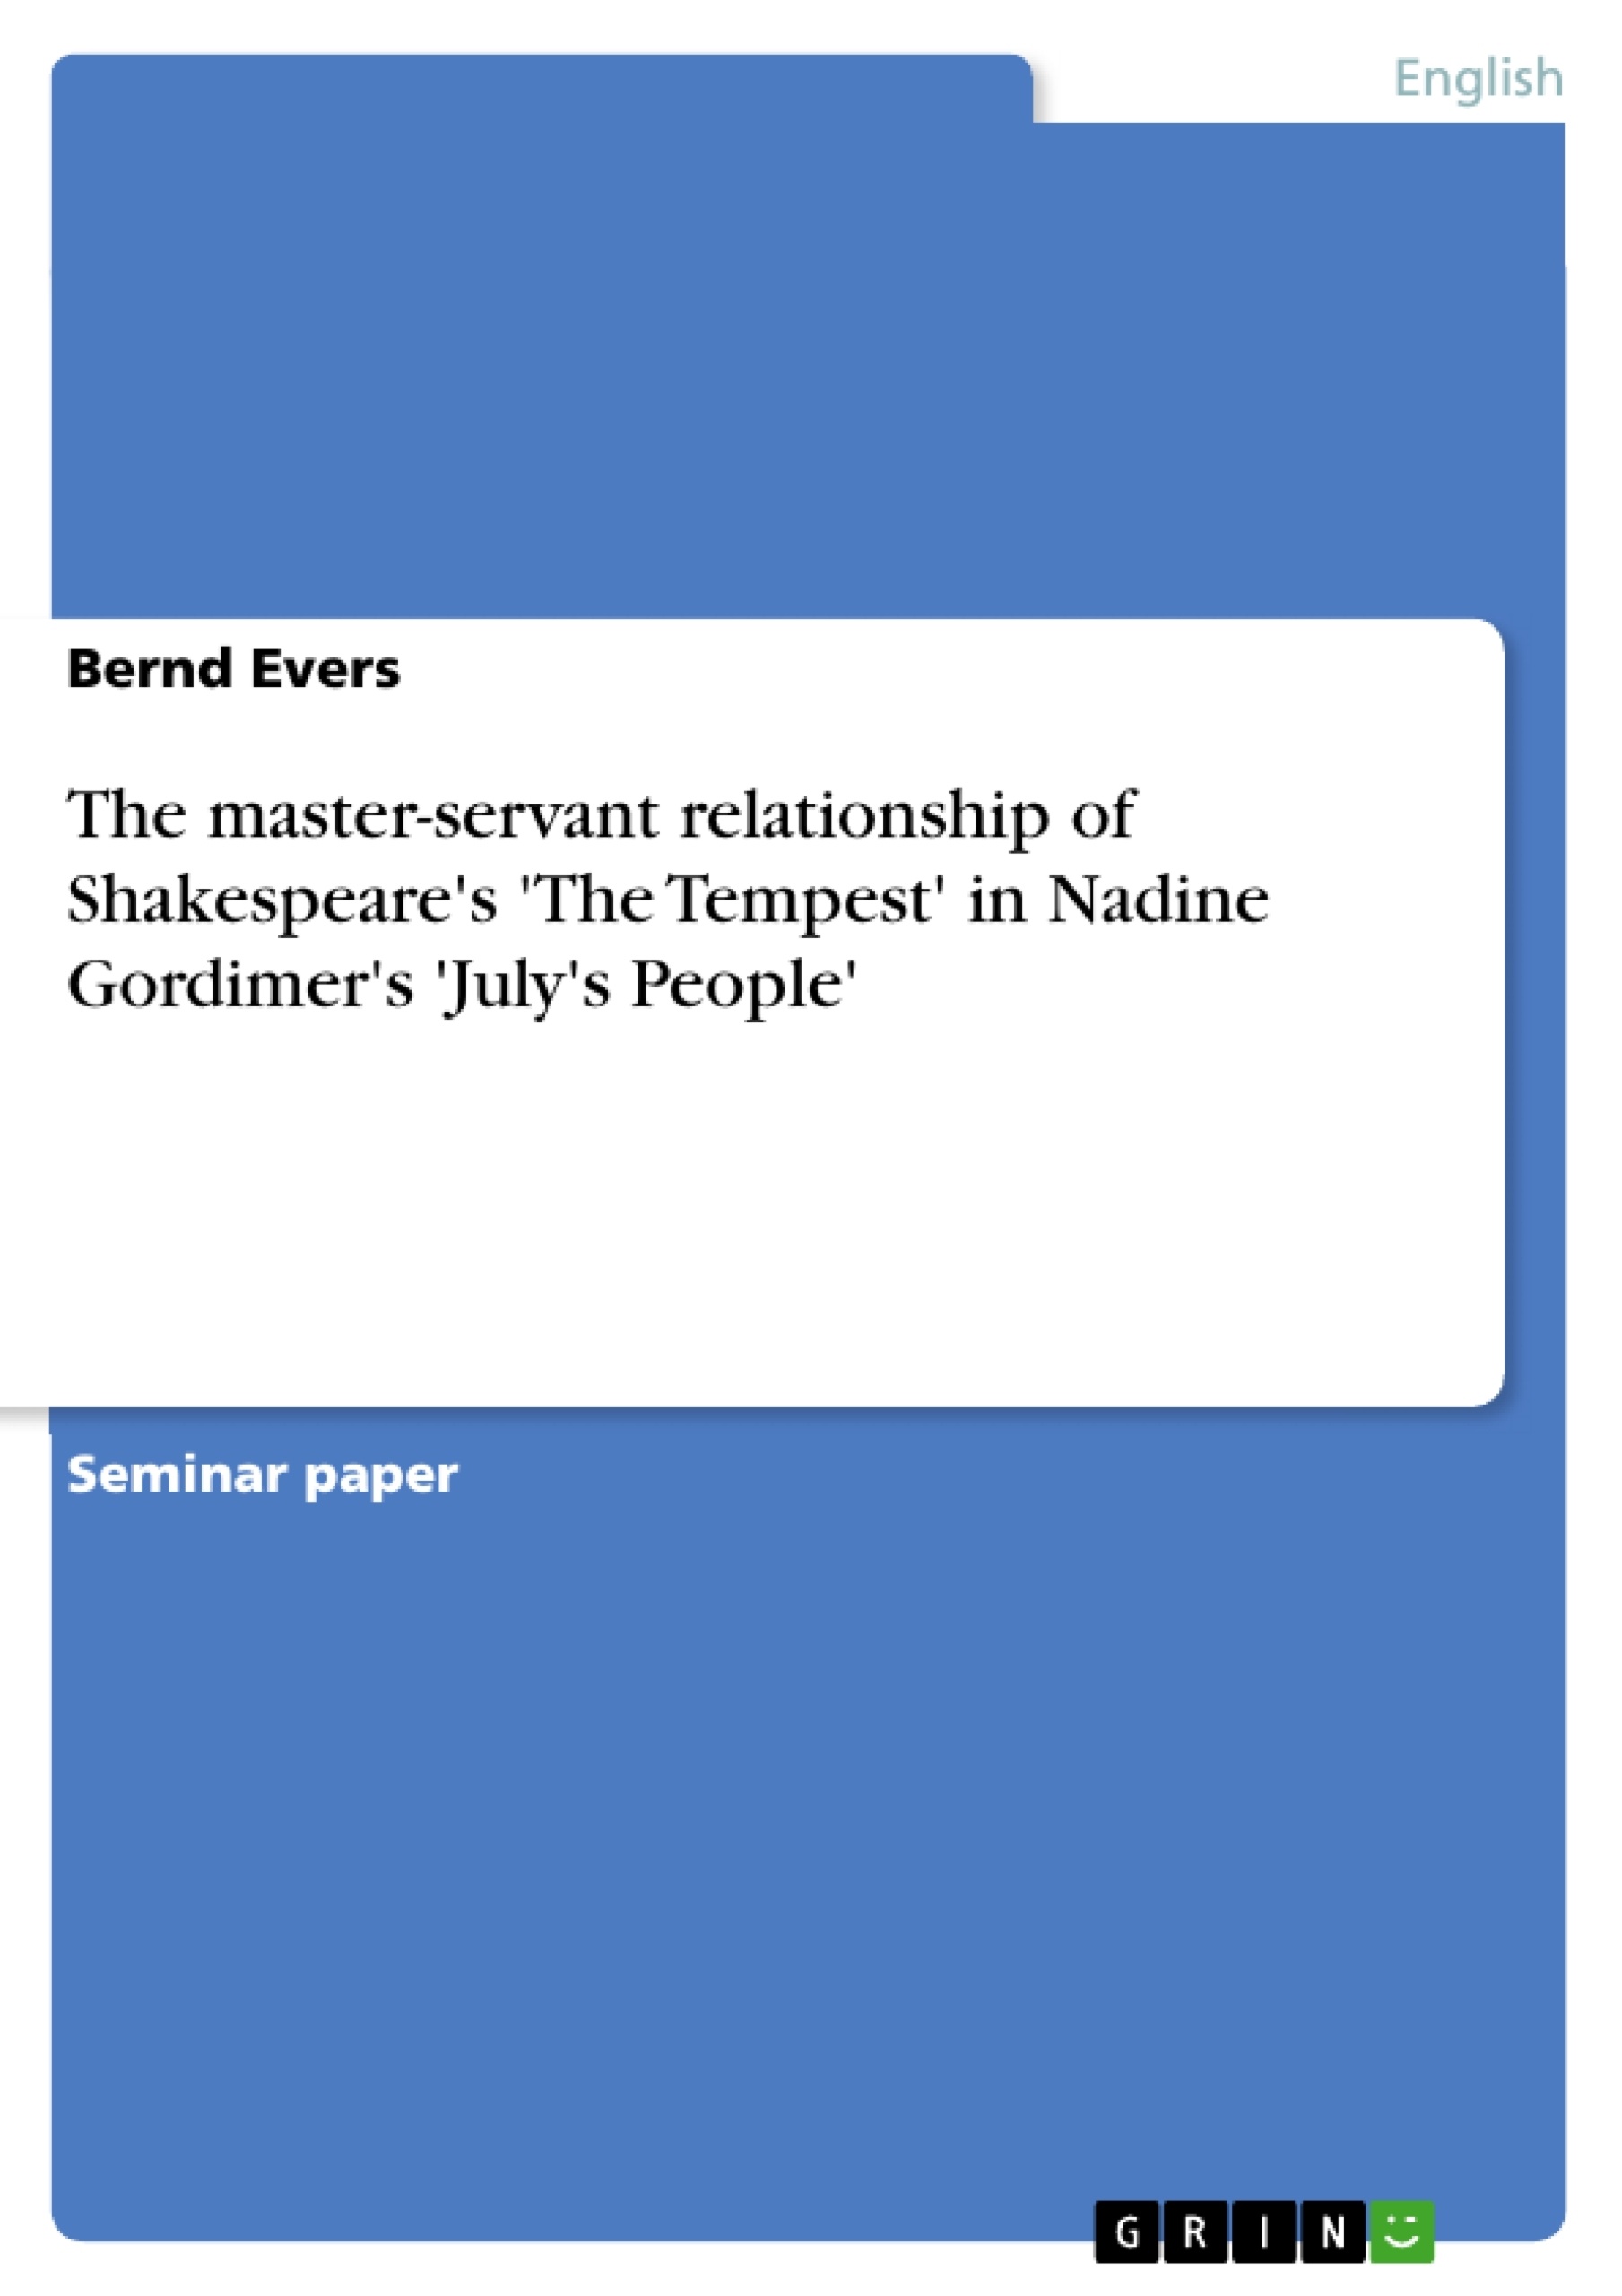 Title: The master-servant relationship of Shakespeare's 'The Tempest' in Nadine Gordimer's 'July's People'